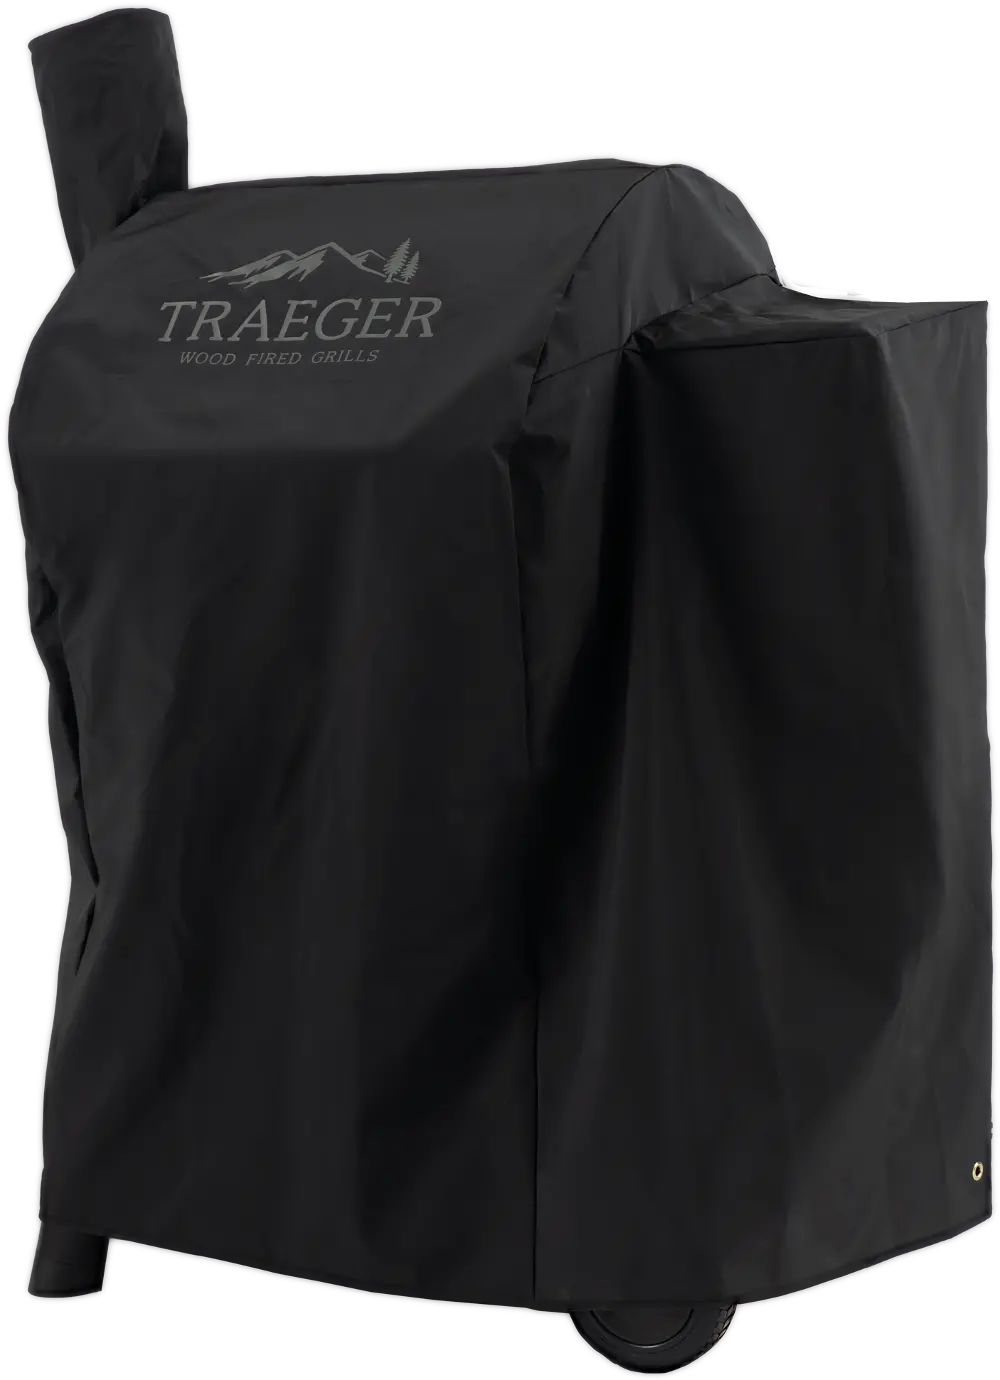 BAC503,COVER-575/22 Traeger Full Length Grill Cover - Pro 575-1